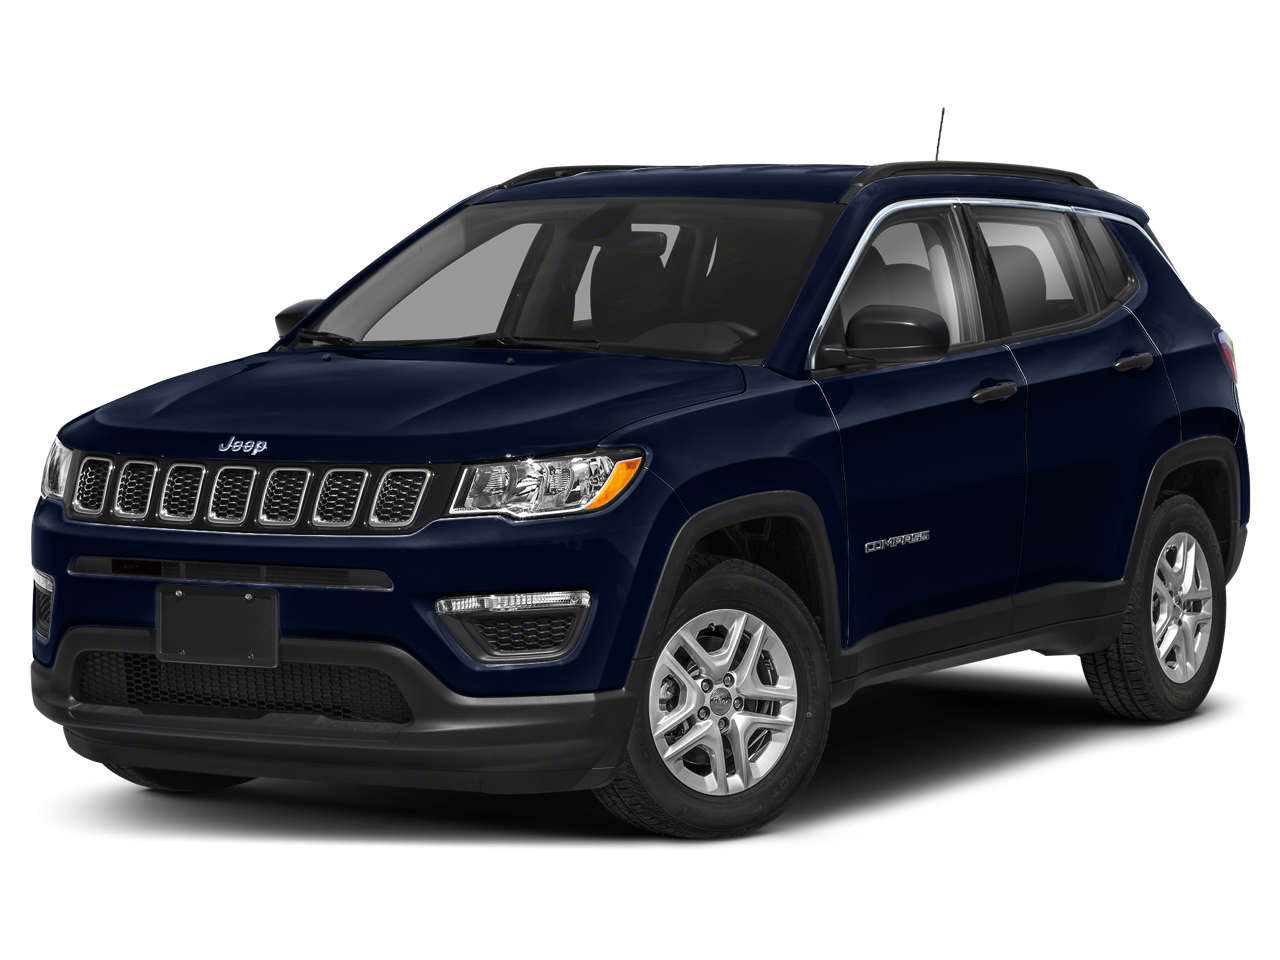 2021 Jeep Compass Limited in huntington wv, WV - Dutch Miller Auto Group